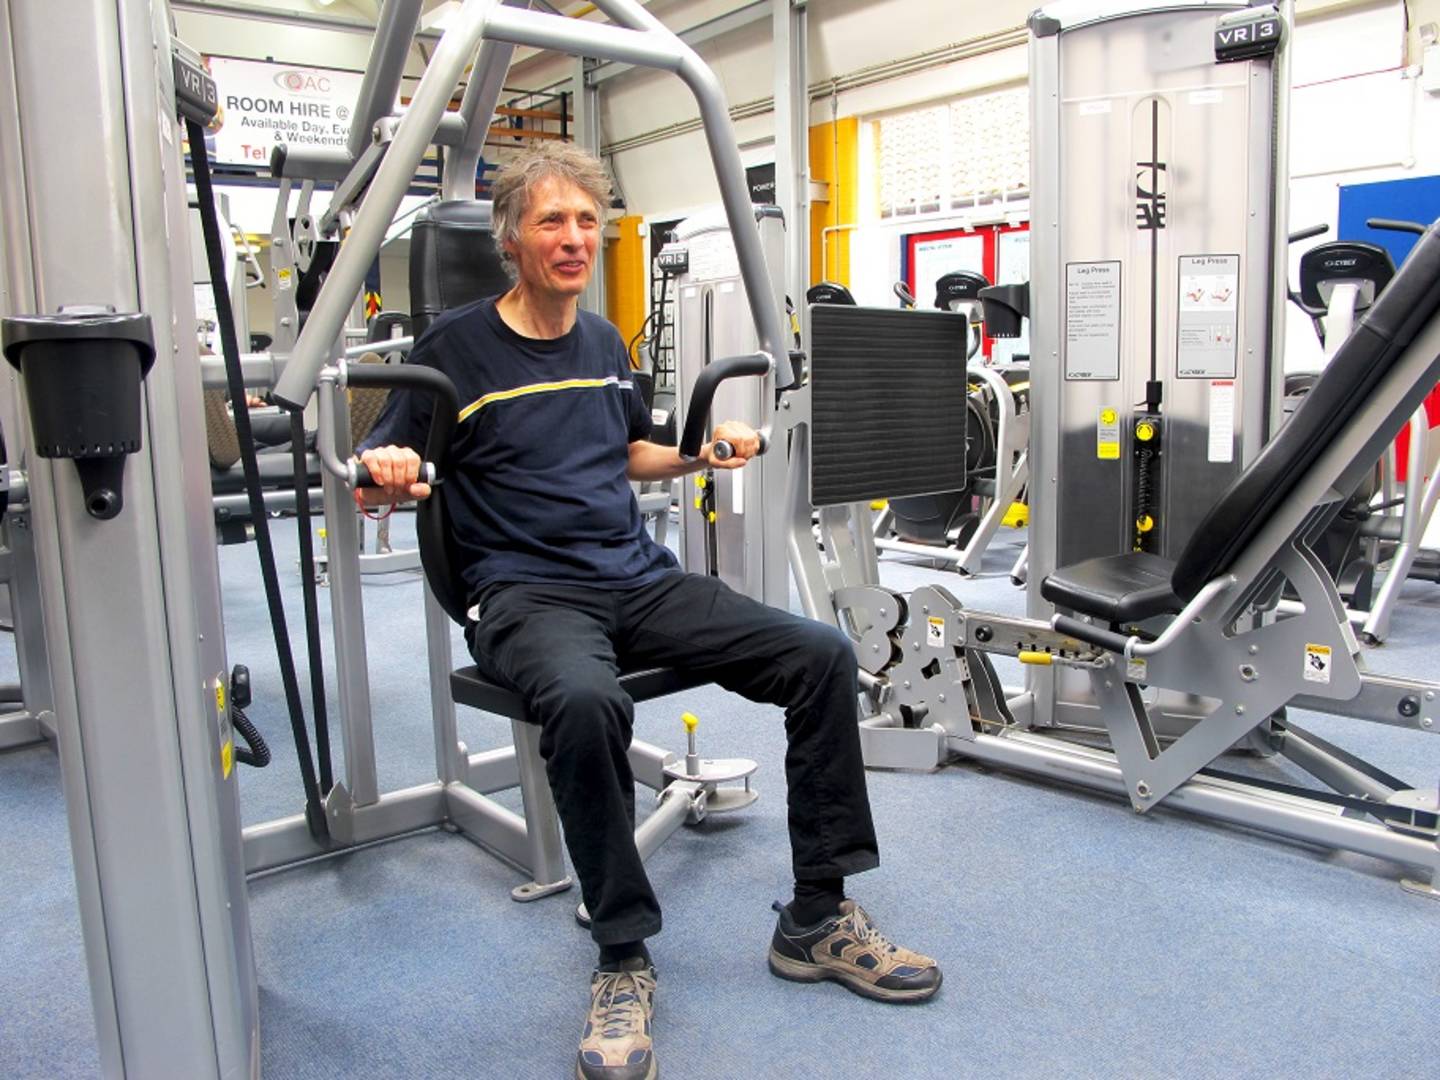 Ian Cook using chest press equipment in gym